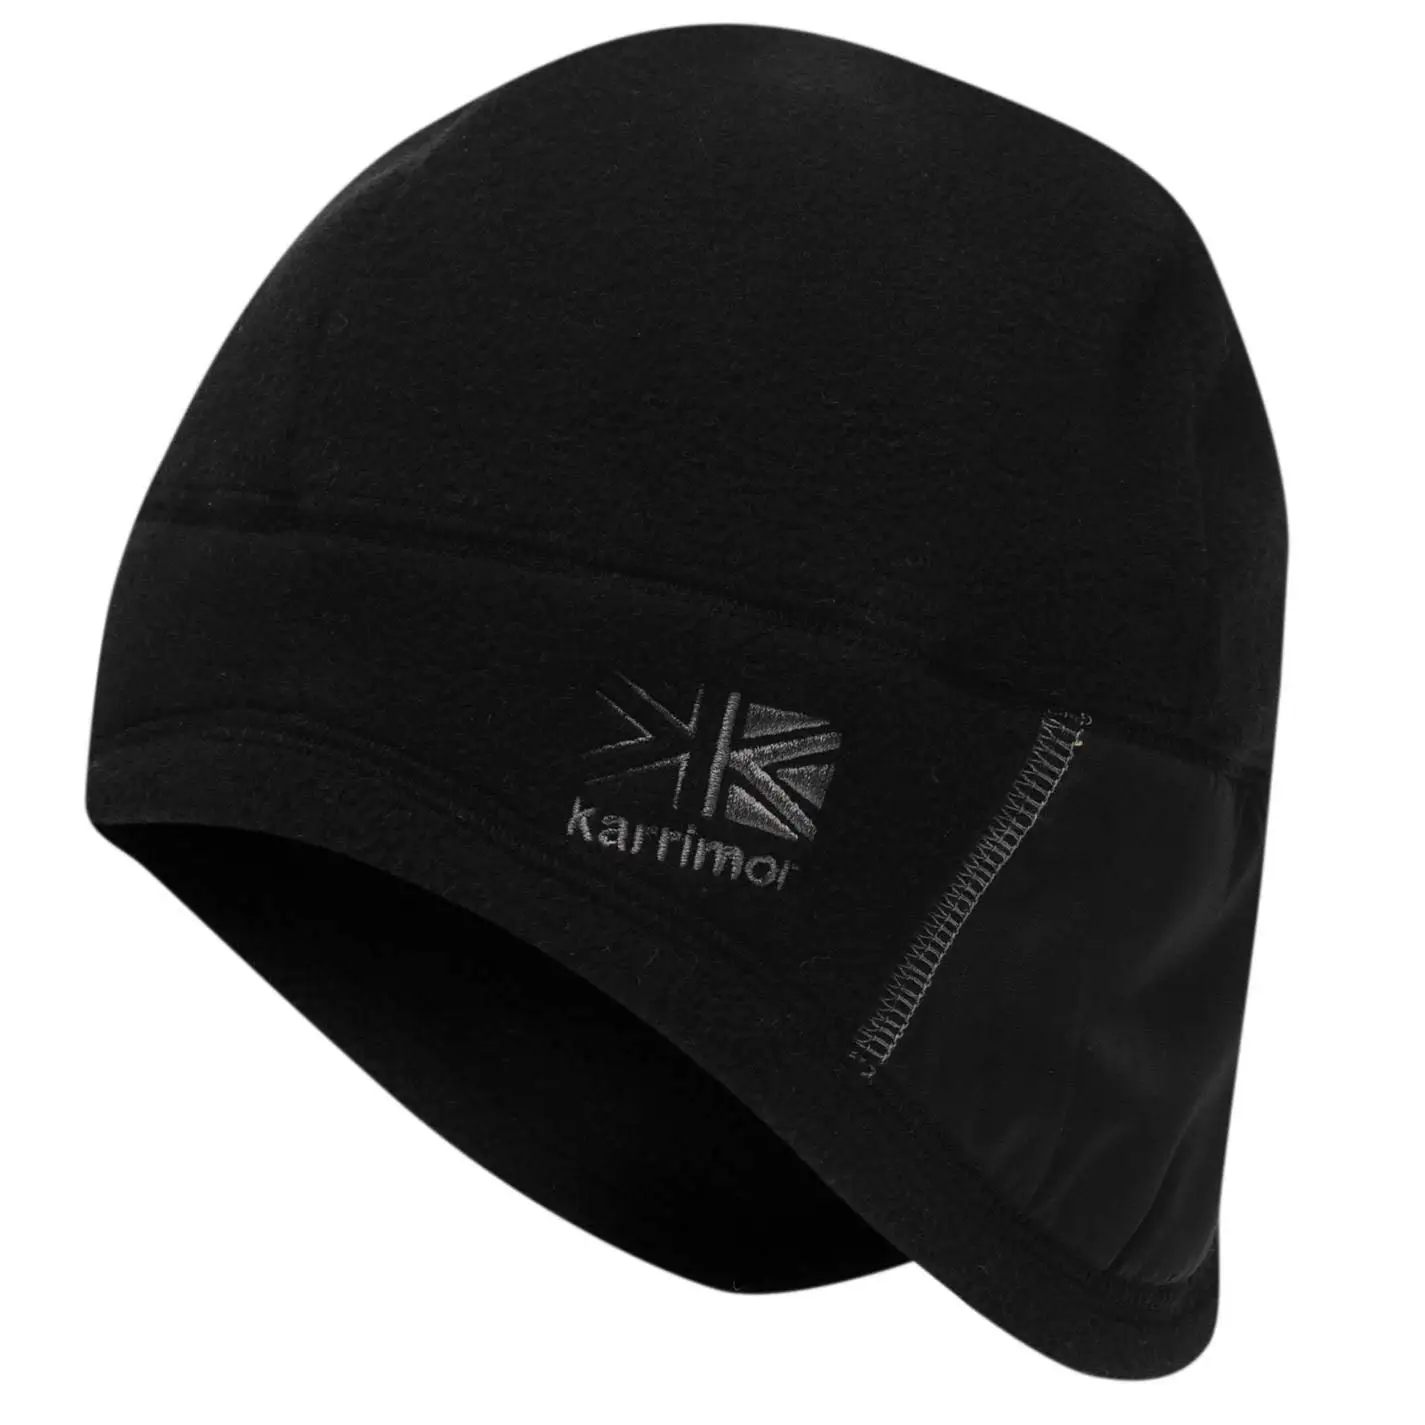 Cheap Army Fleece Hat, find Army Fleece Hat deals on line at Alibaba.com